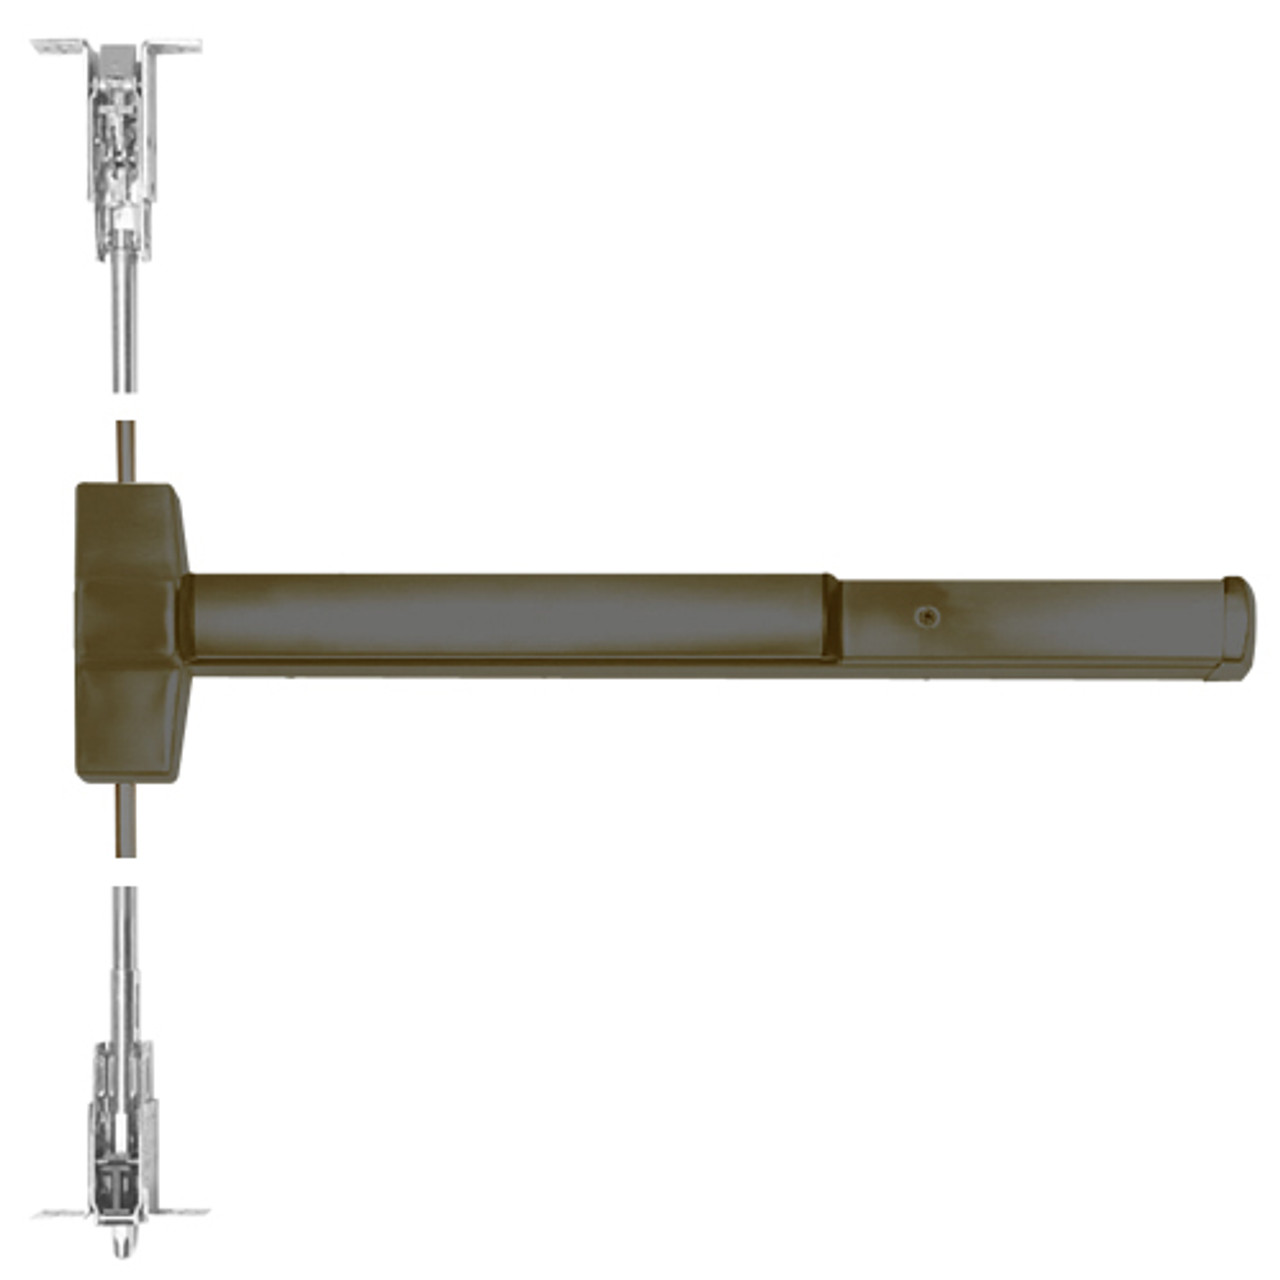 ED5800-613-M52 Corbin ED5800 Series Non Fire Rated Concealed Vertical Rod Device with Cylinder Dogging in Oil Rubbed Bronze Finish